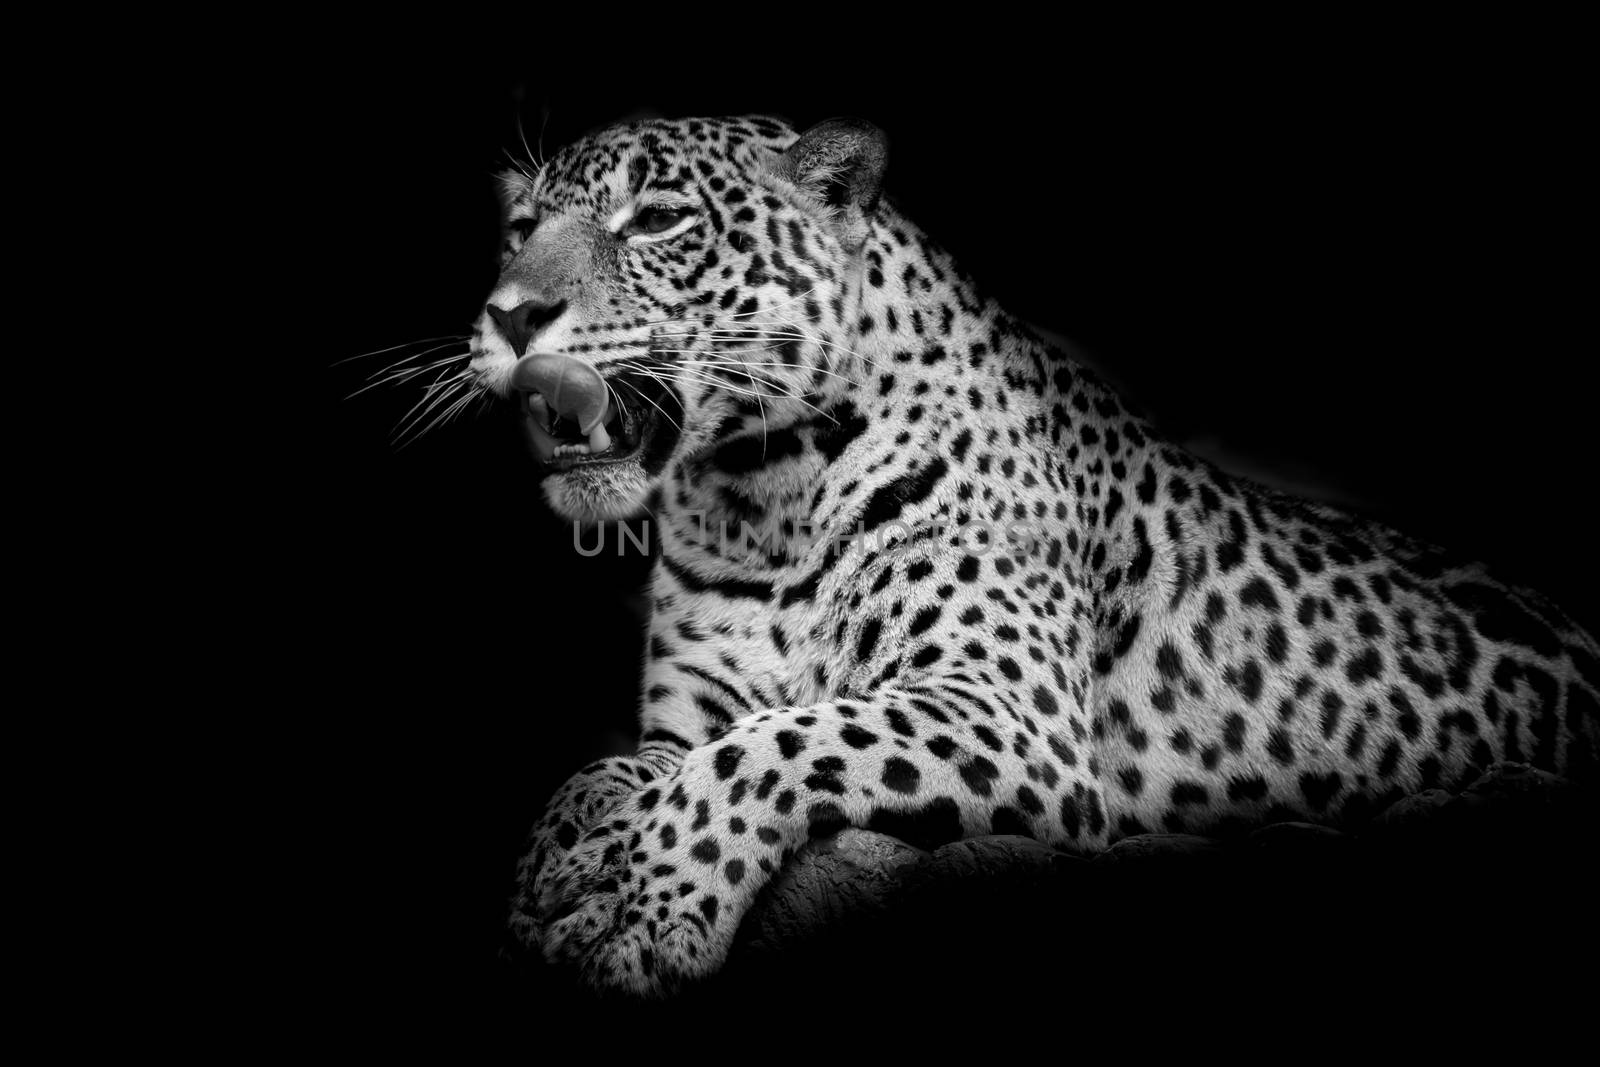 Leopard black and white by art9858